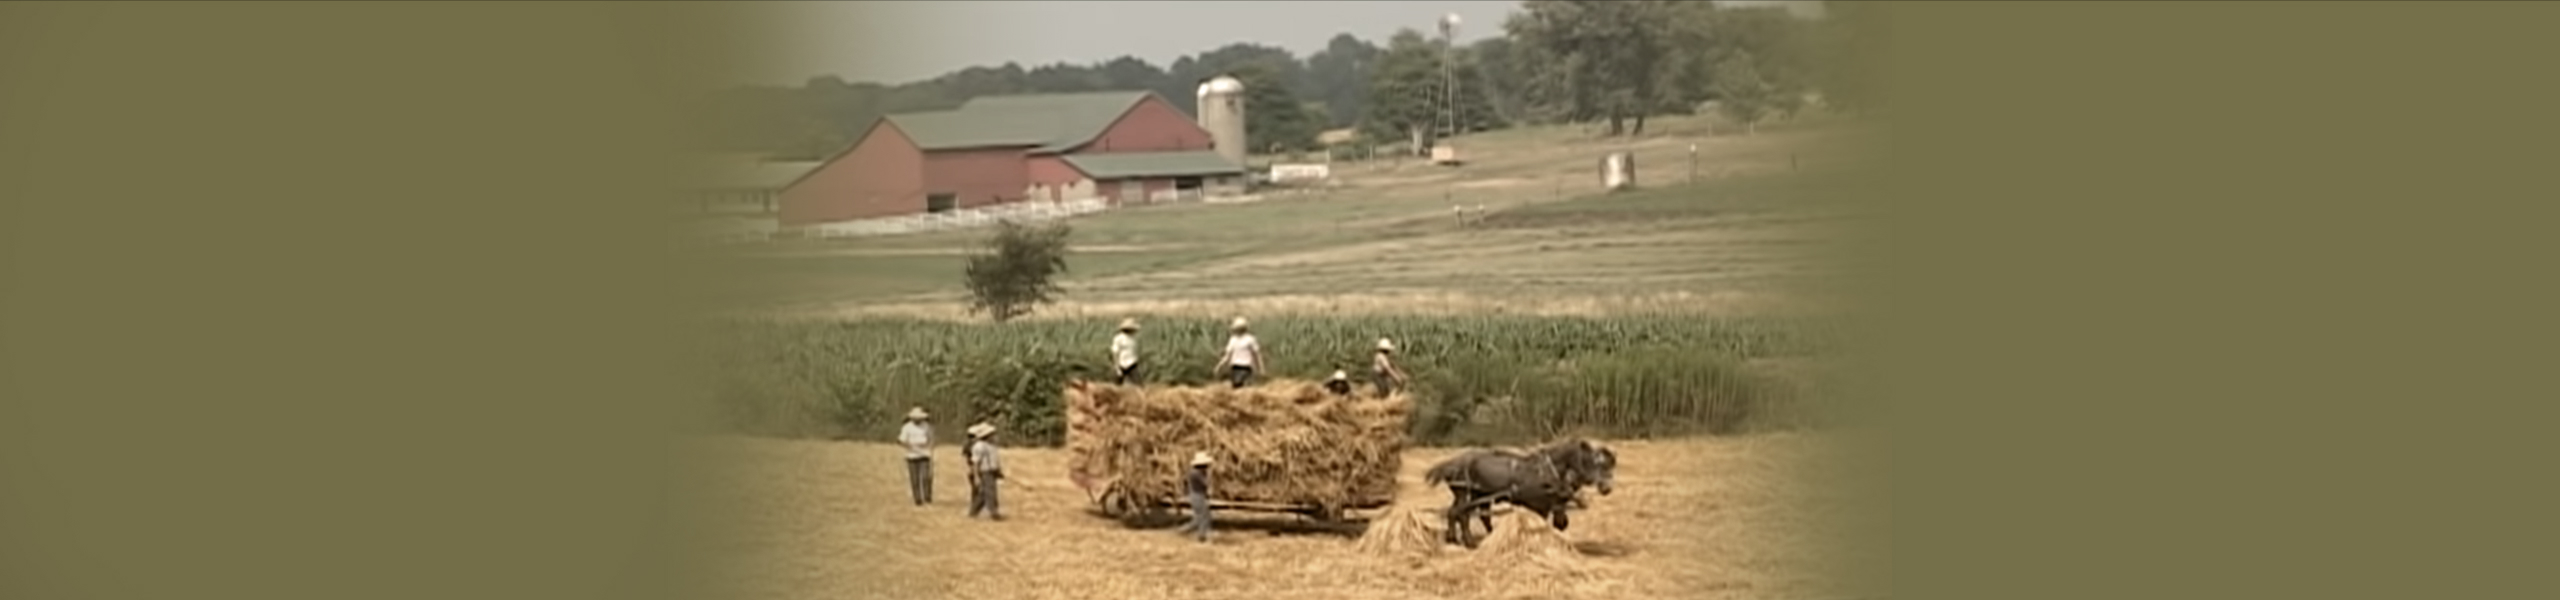 The Amish: How They Survive